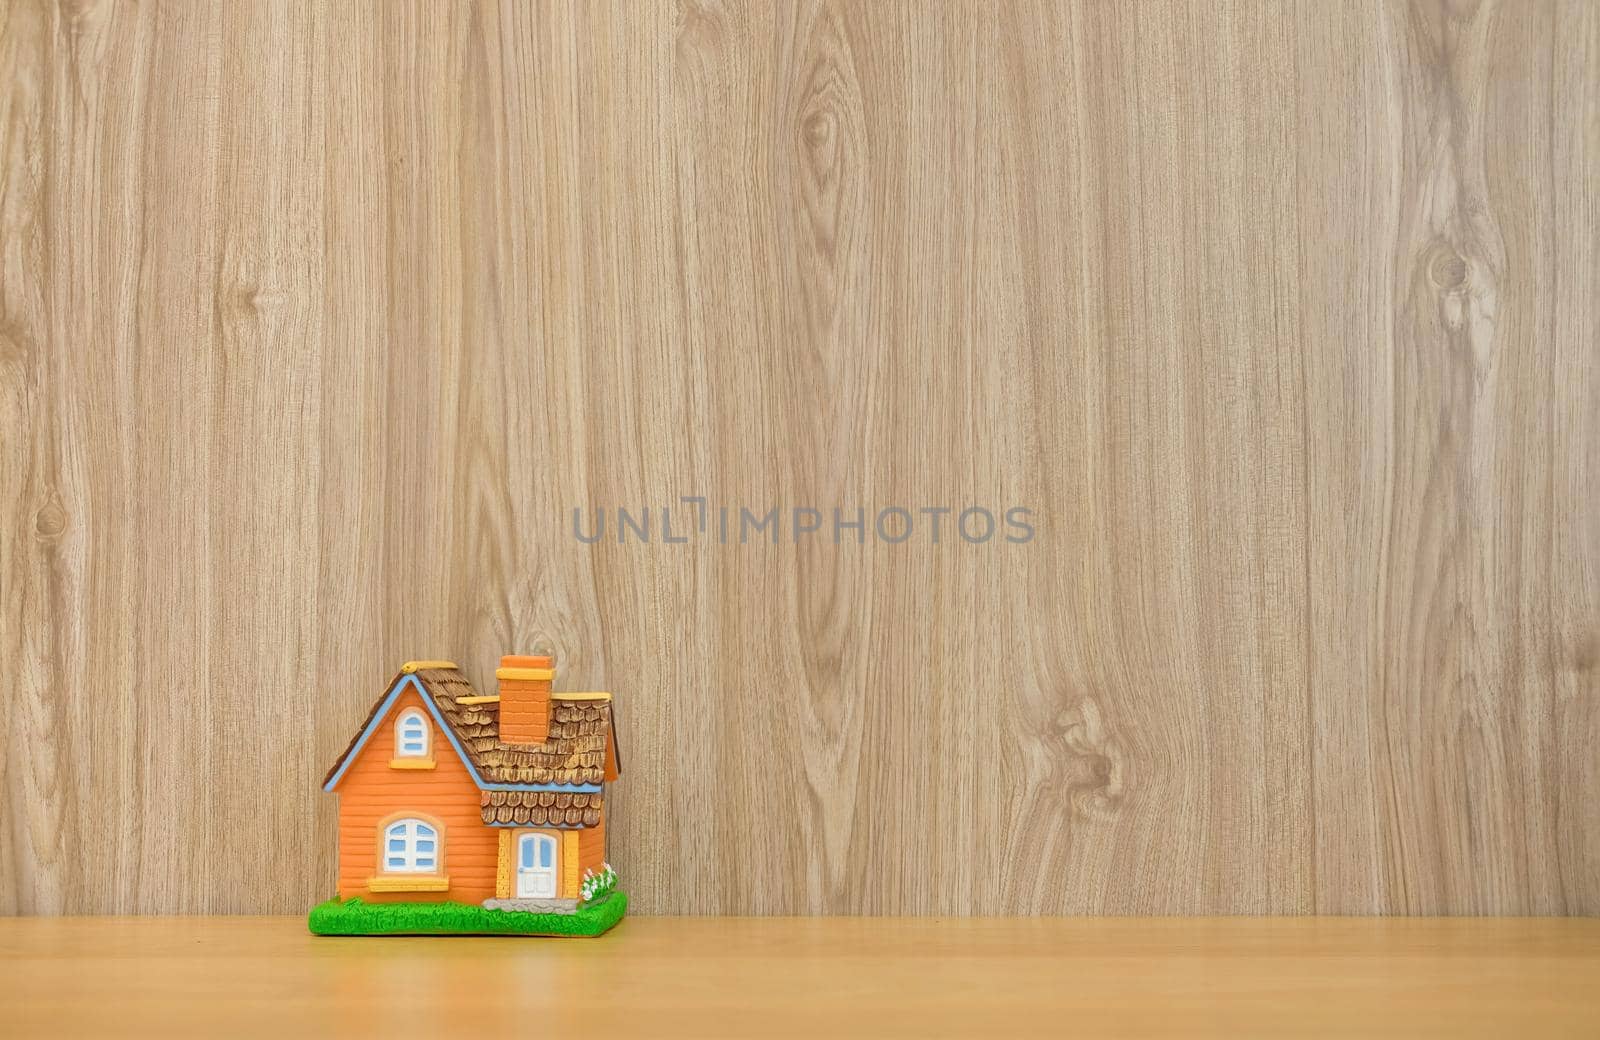 house model on wooden desk. realtor real estate agent workplace. buying selling renting property by pp99